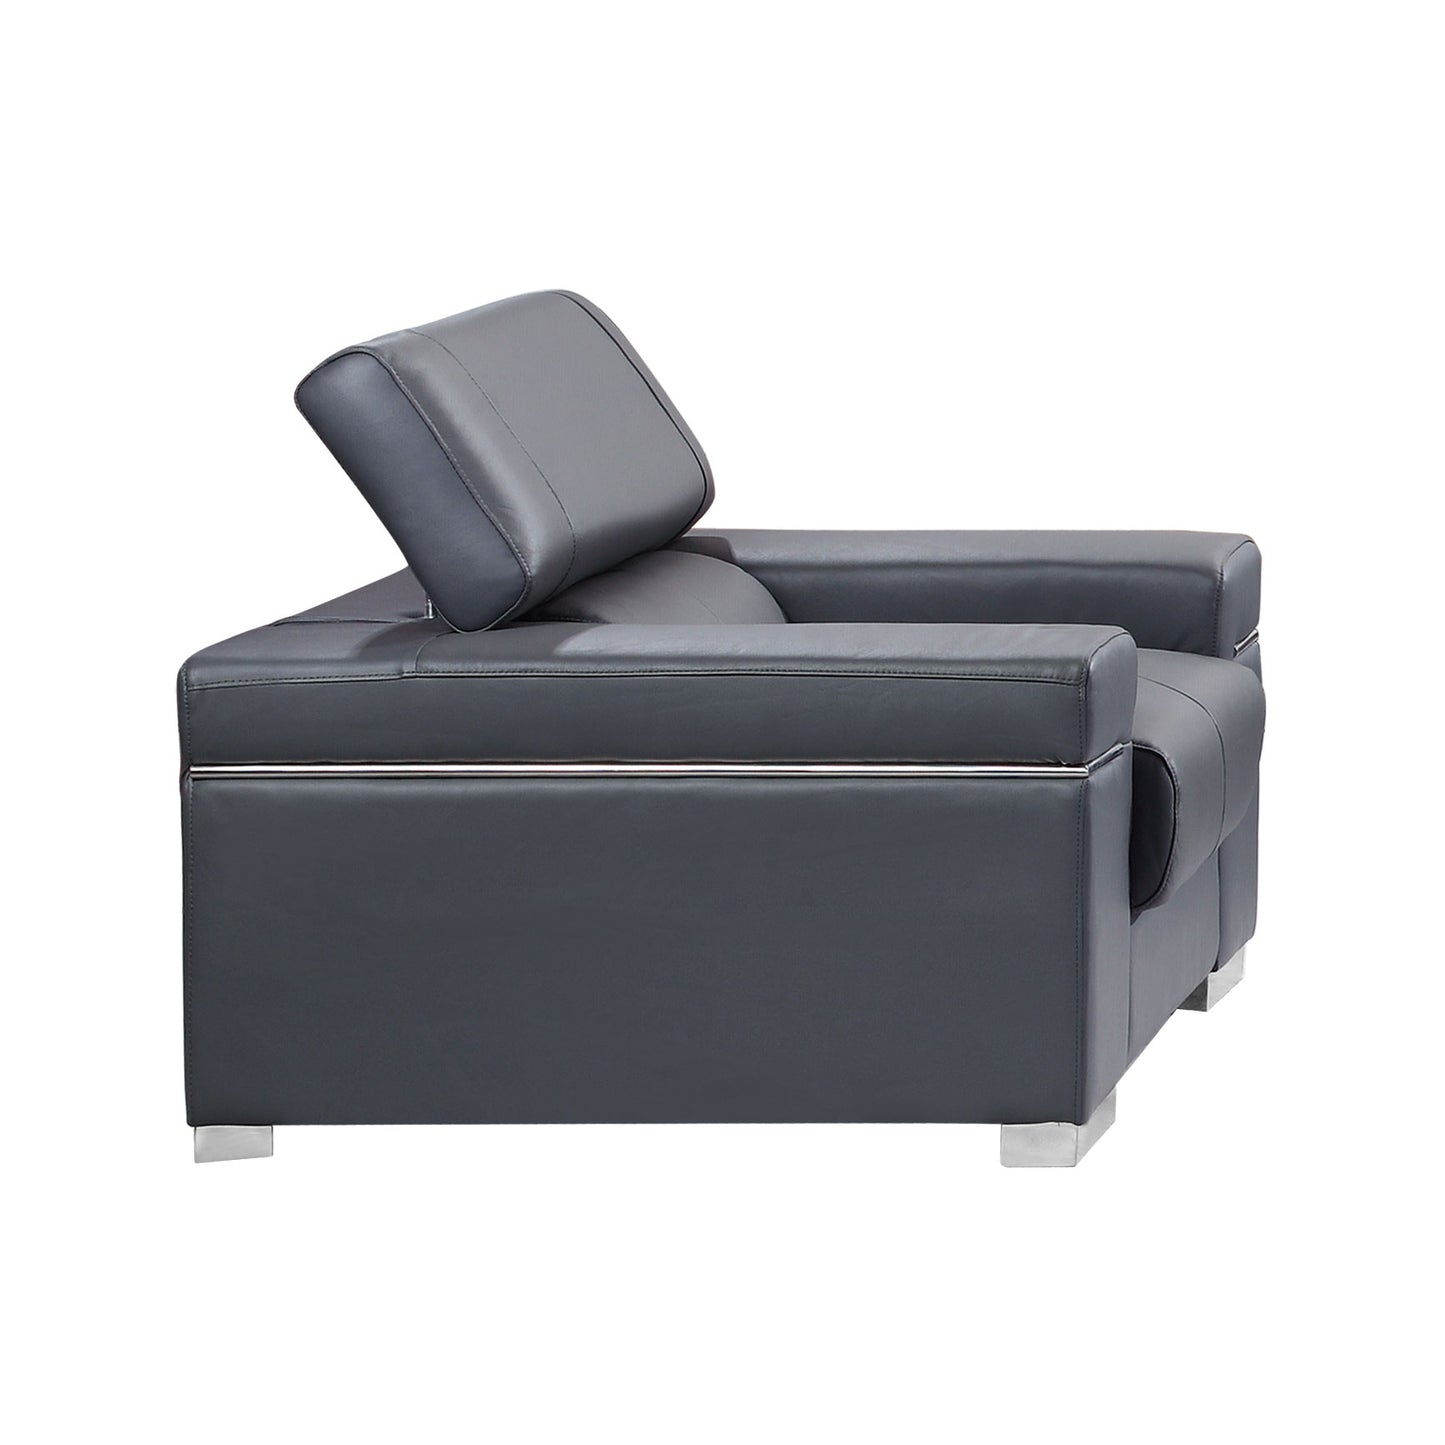 Soho Chair Grey Leather by JM